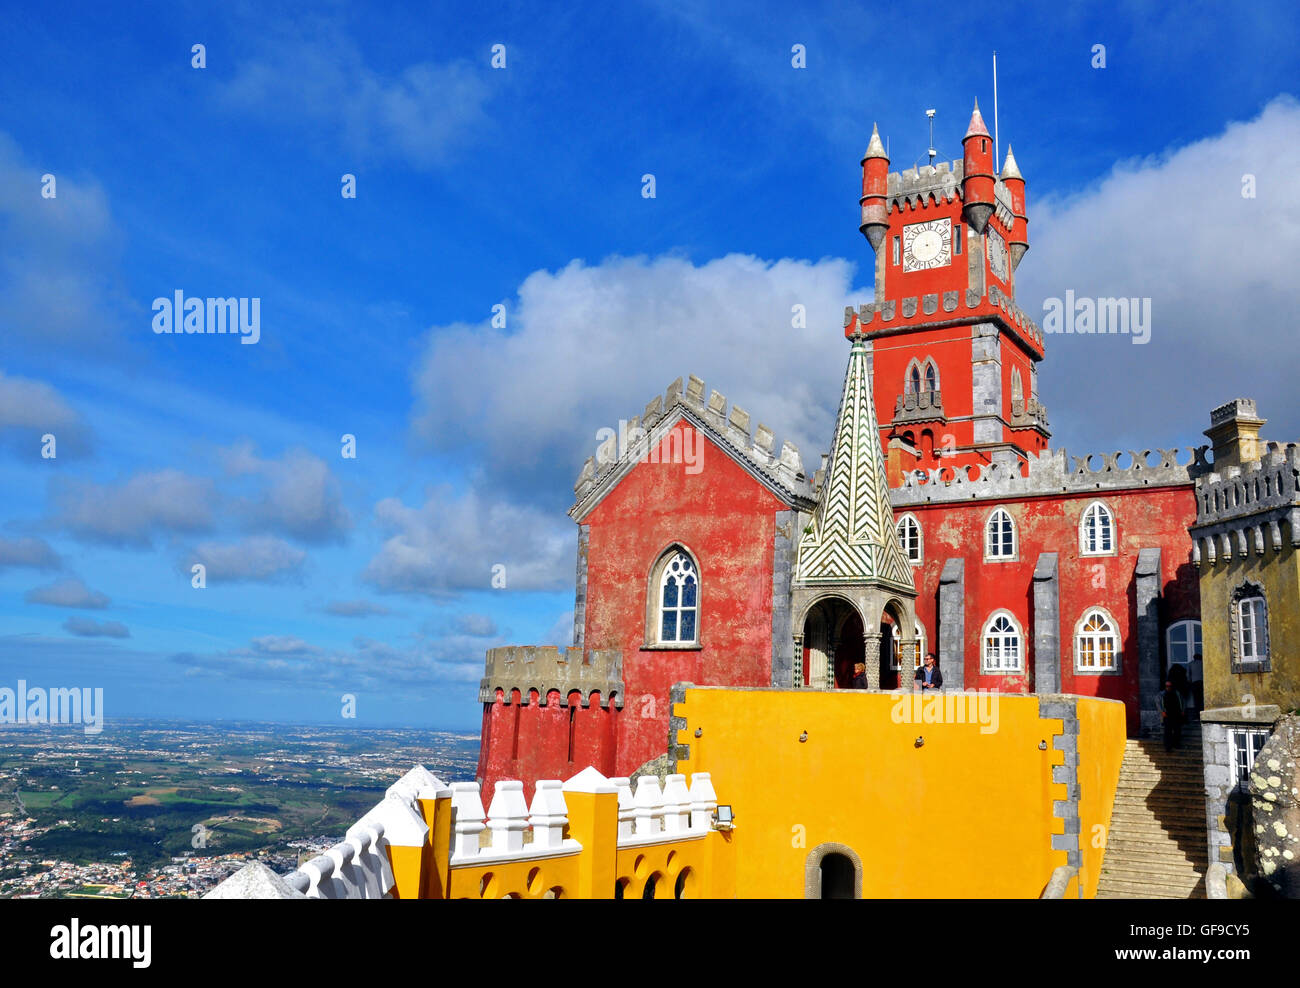 SINTRA, PORTUGAL - NOVEMBER 9: The Pena National Palace in Sintra on november 9, 2013. The palace is a UNESCO World Heritage Sit Stock Photo